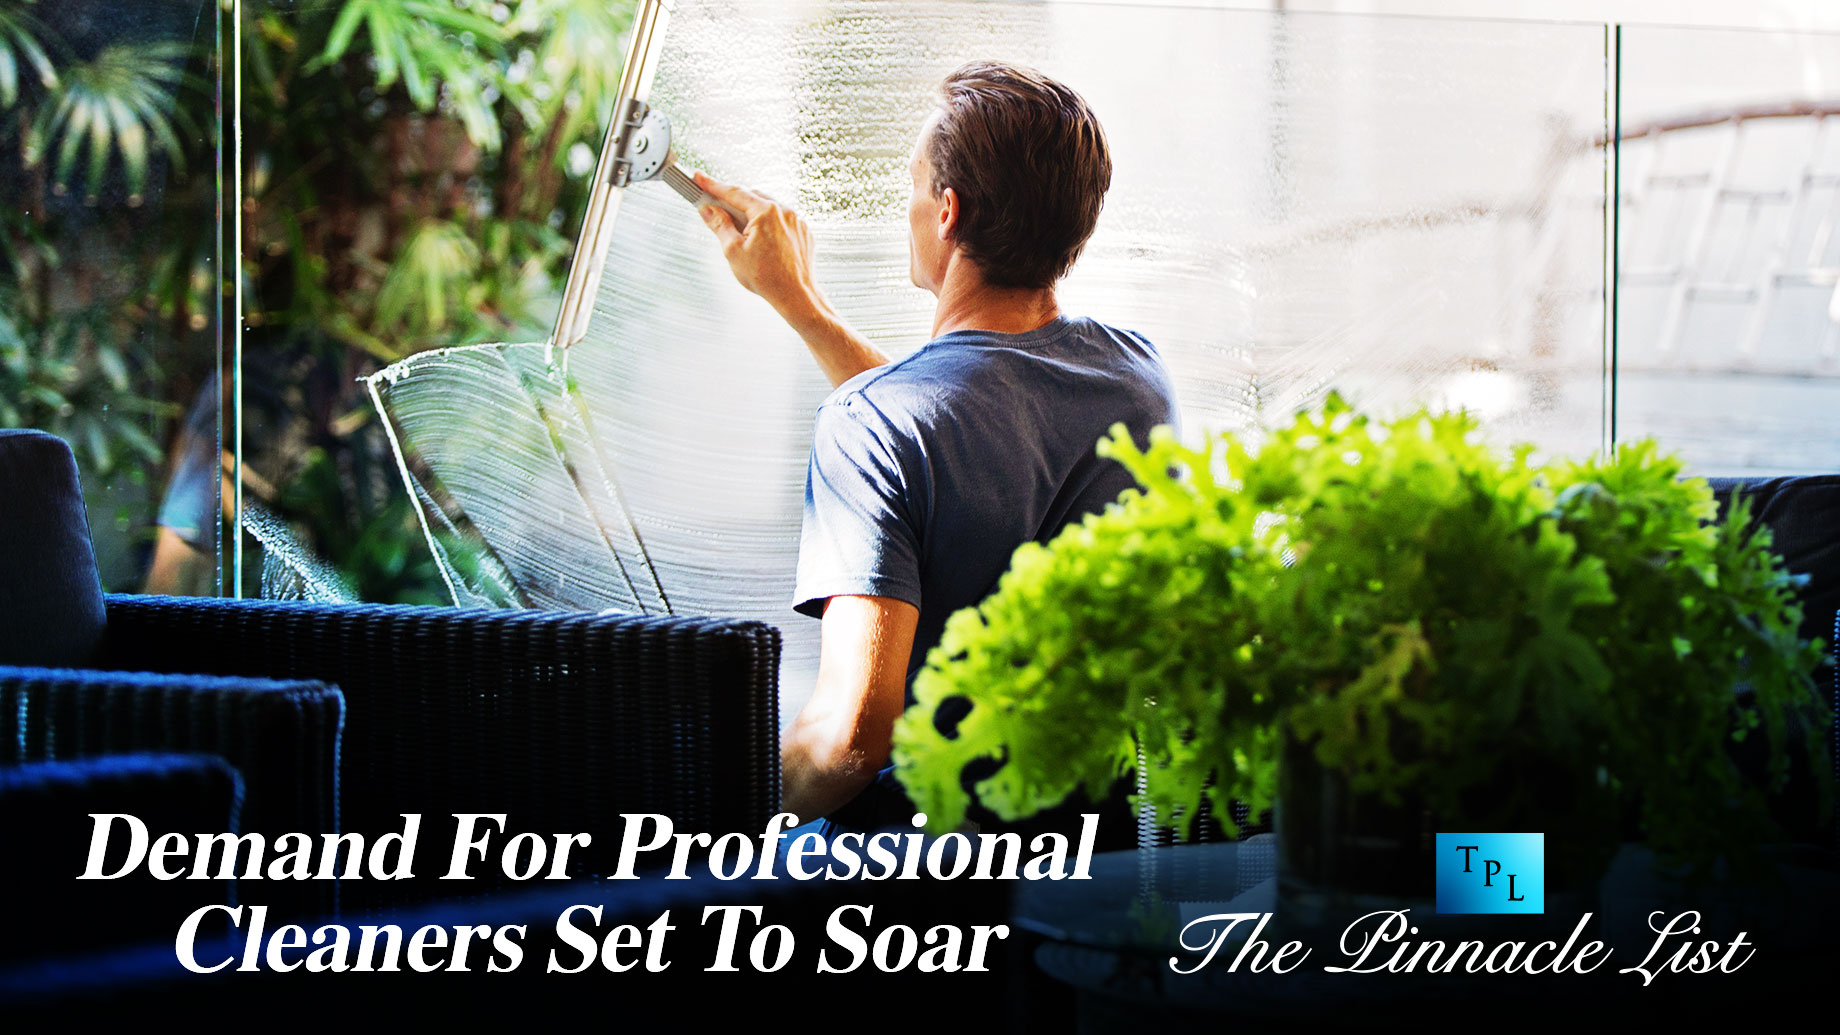 Demand For Professional Cleaners Set To Soar